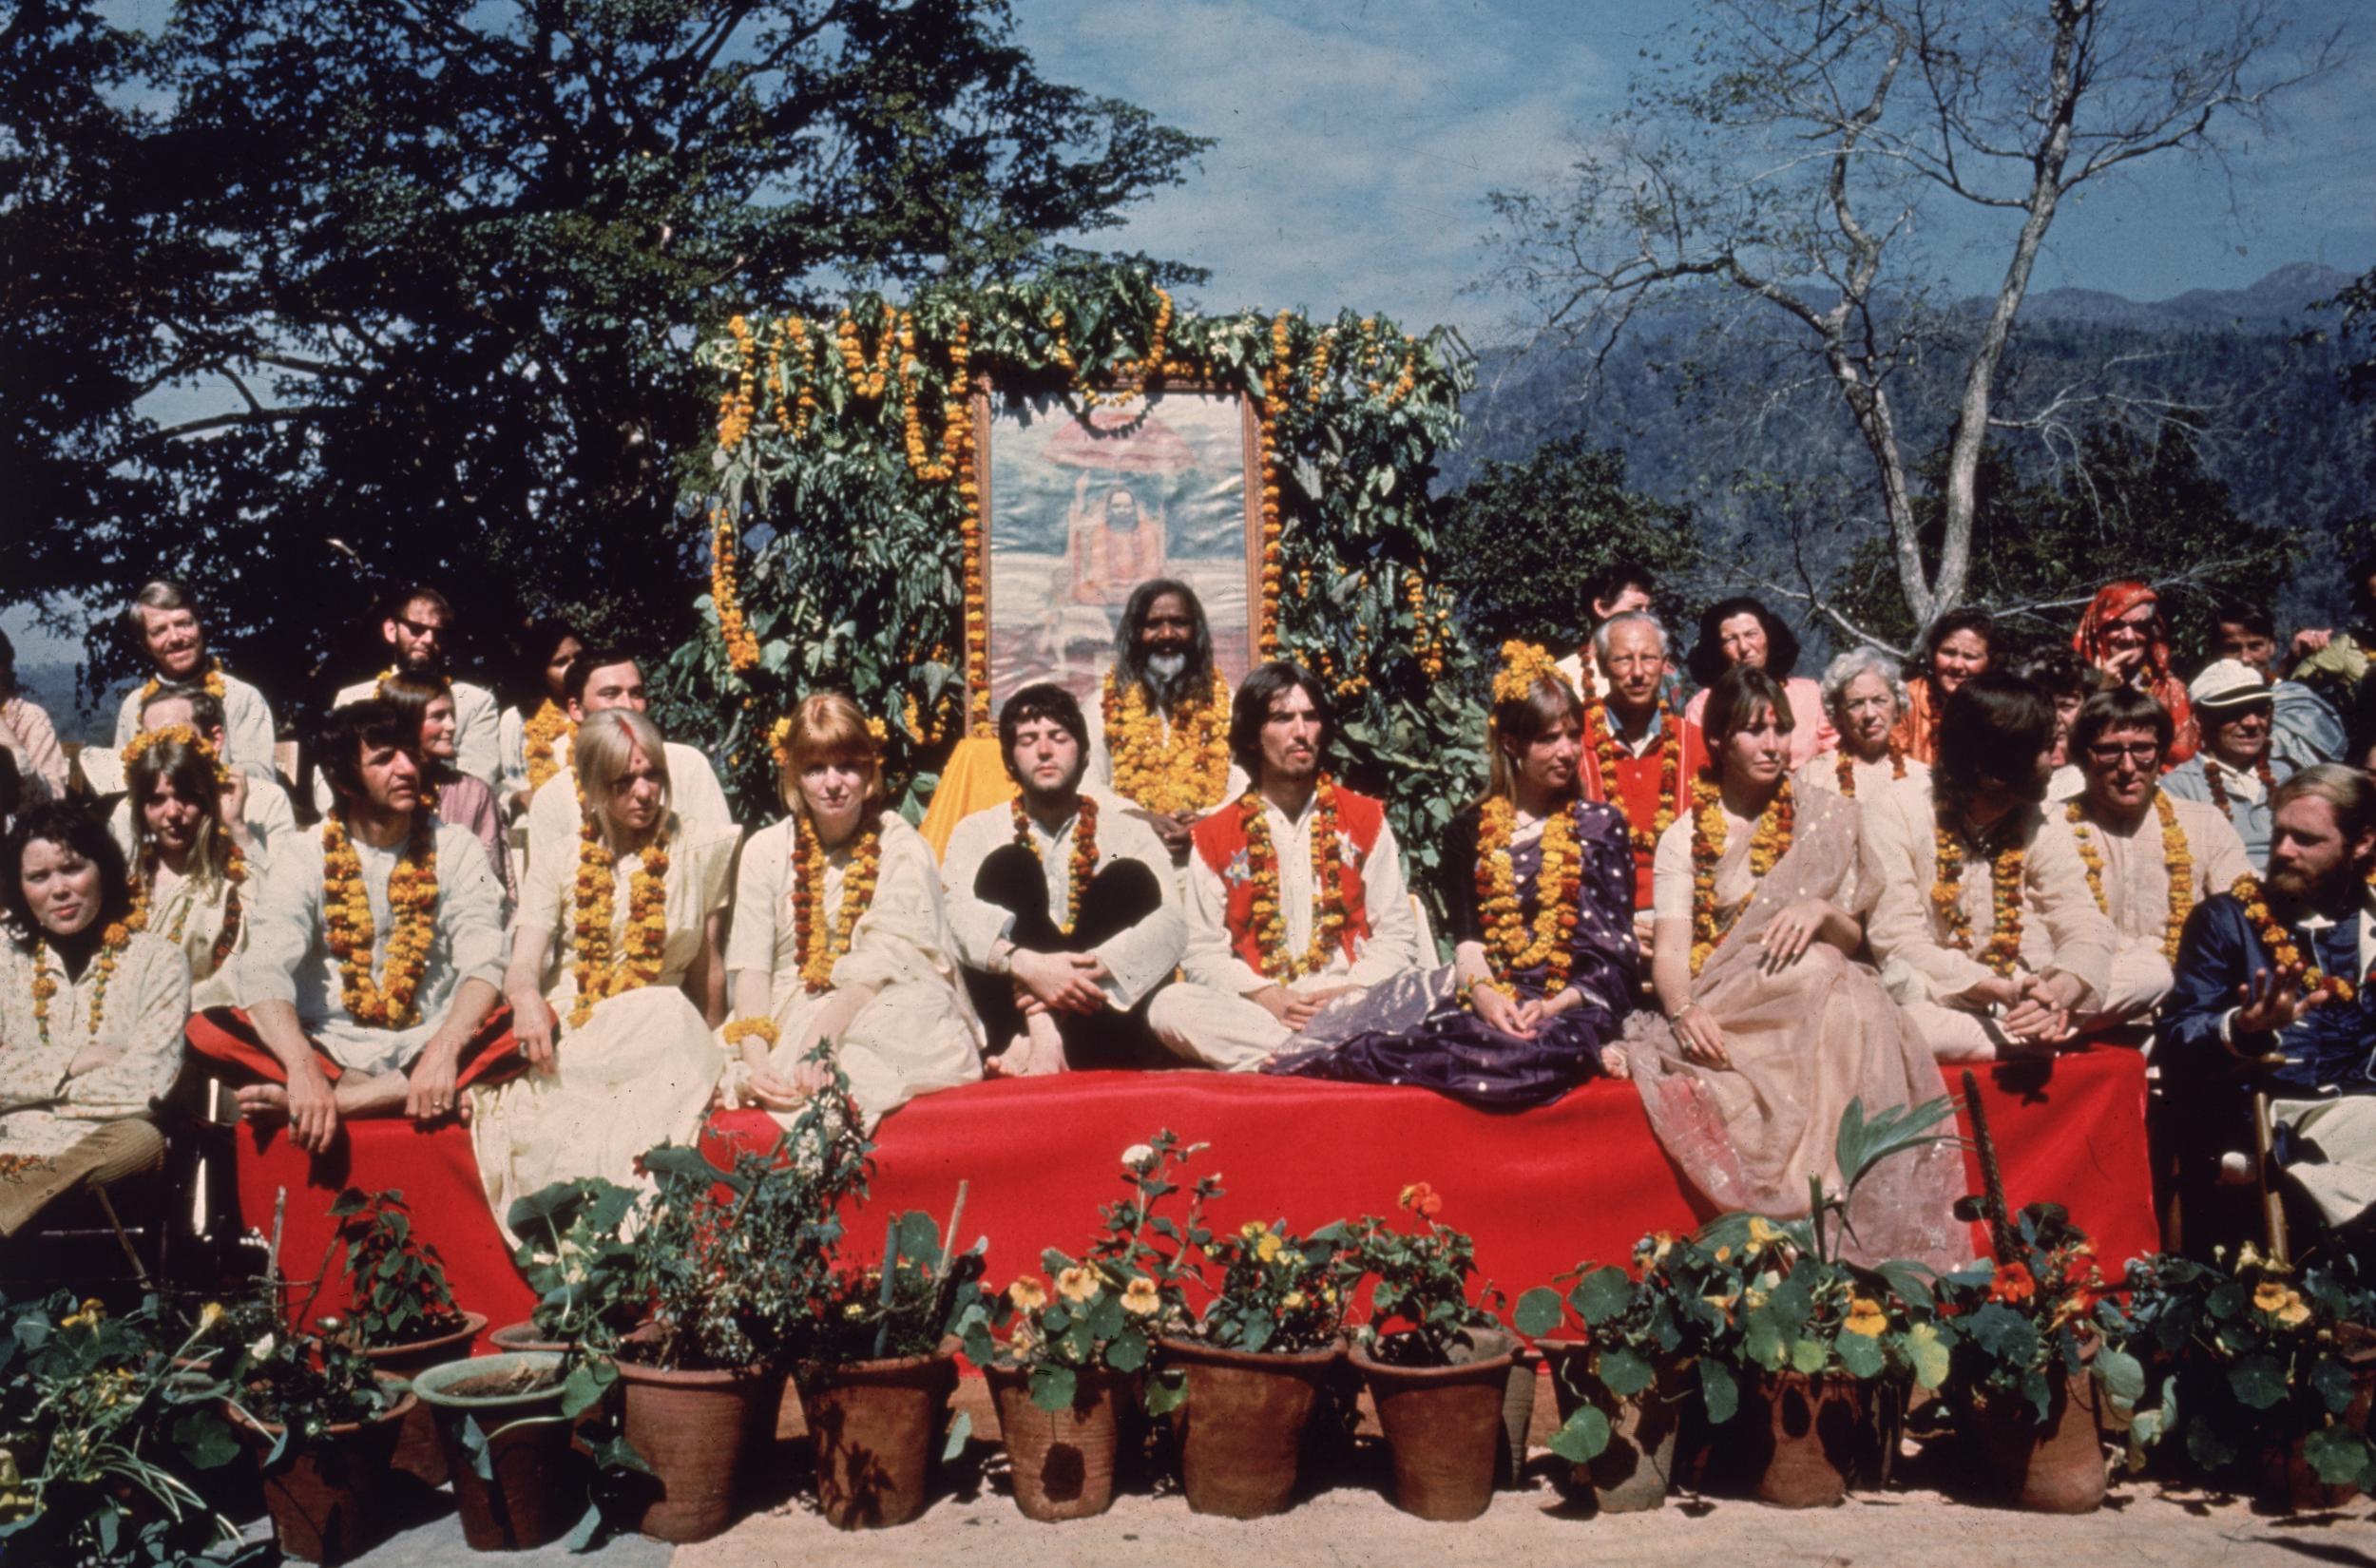 The band wrote some of their most memorable songs in Rishikesh, but later described the excursion as a ‘mistake’